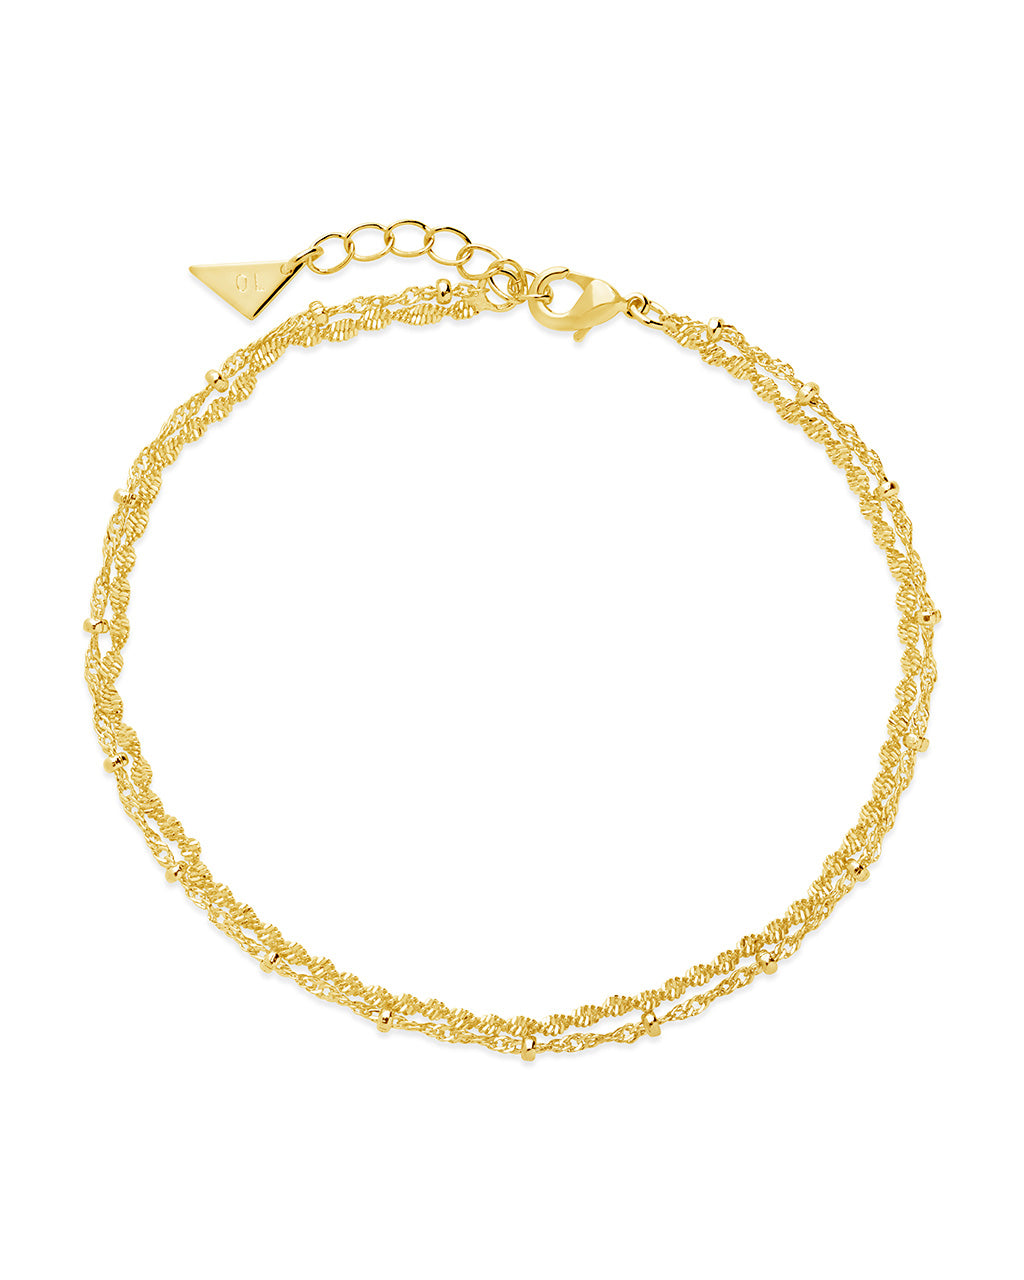 Kyra Layered Chain Anklet Anklet Sterling Forever Gold 